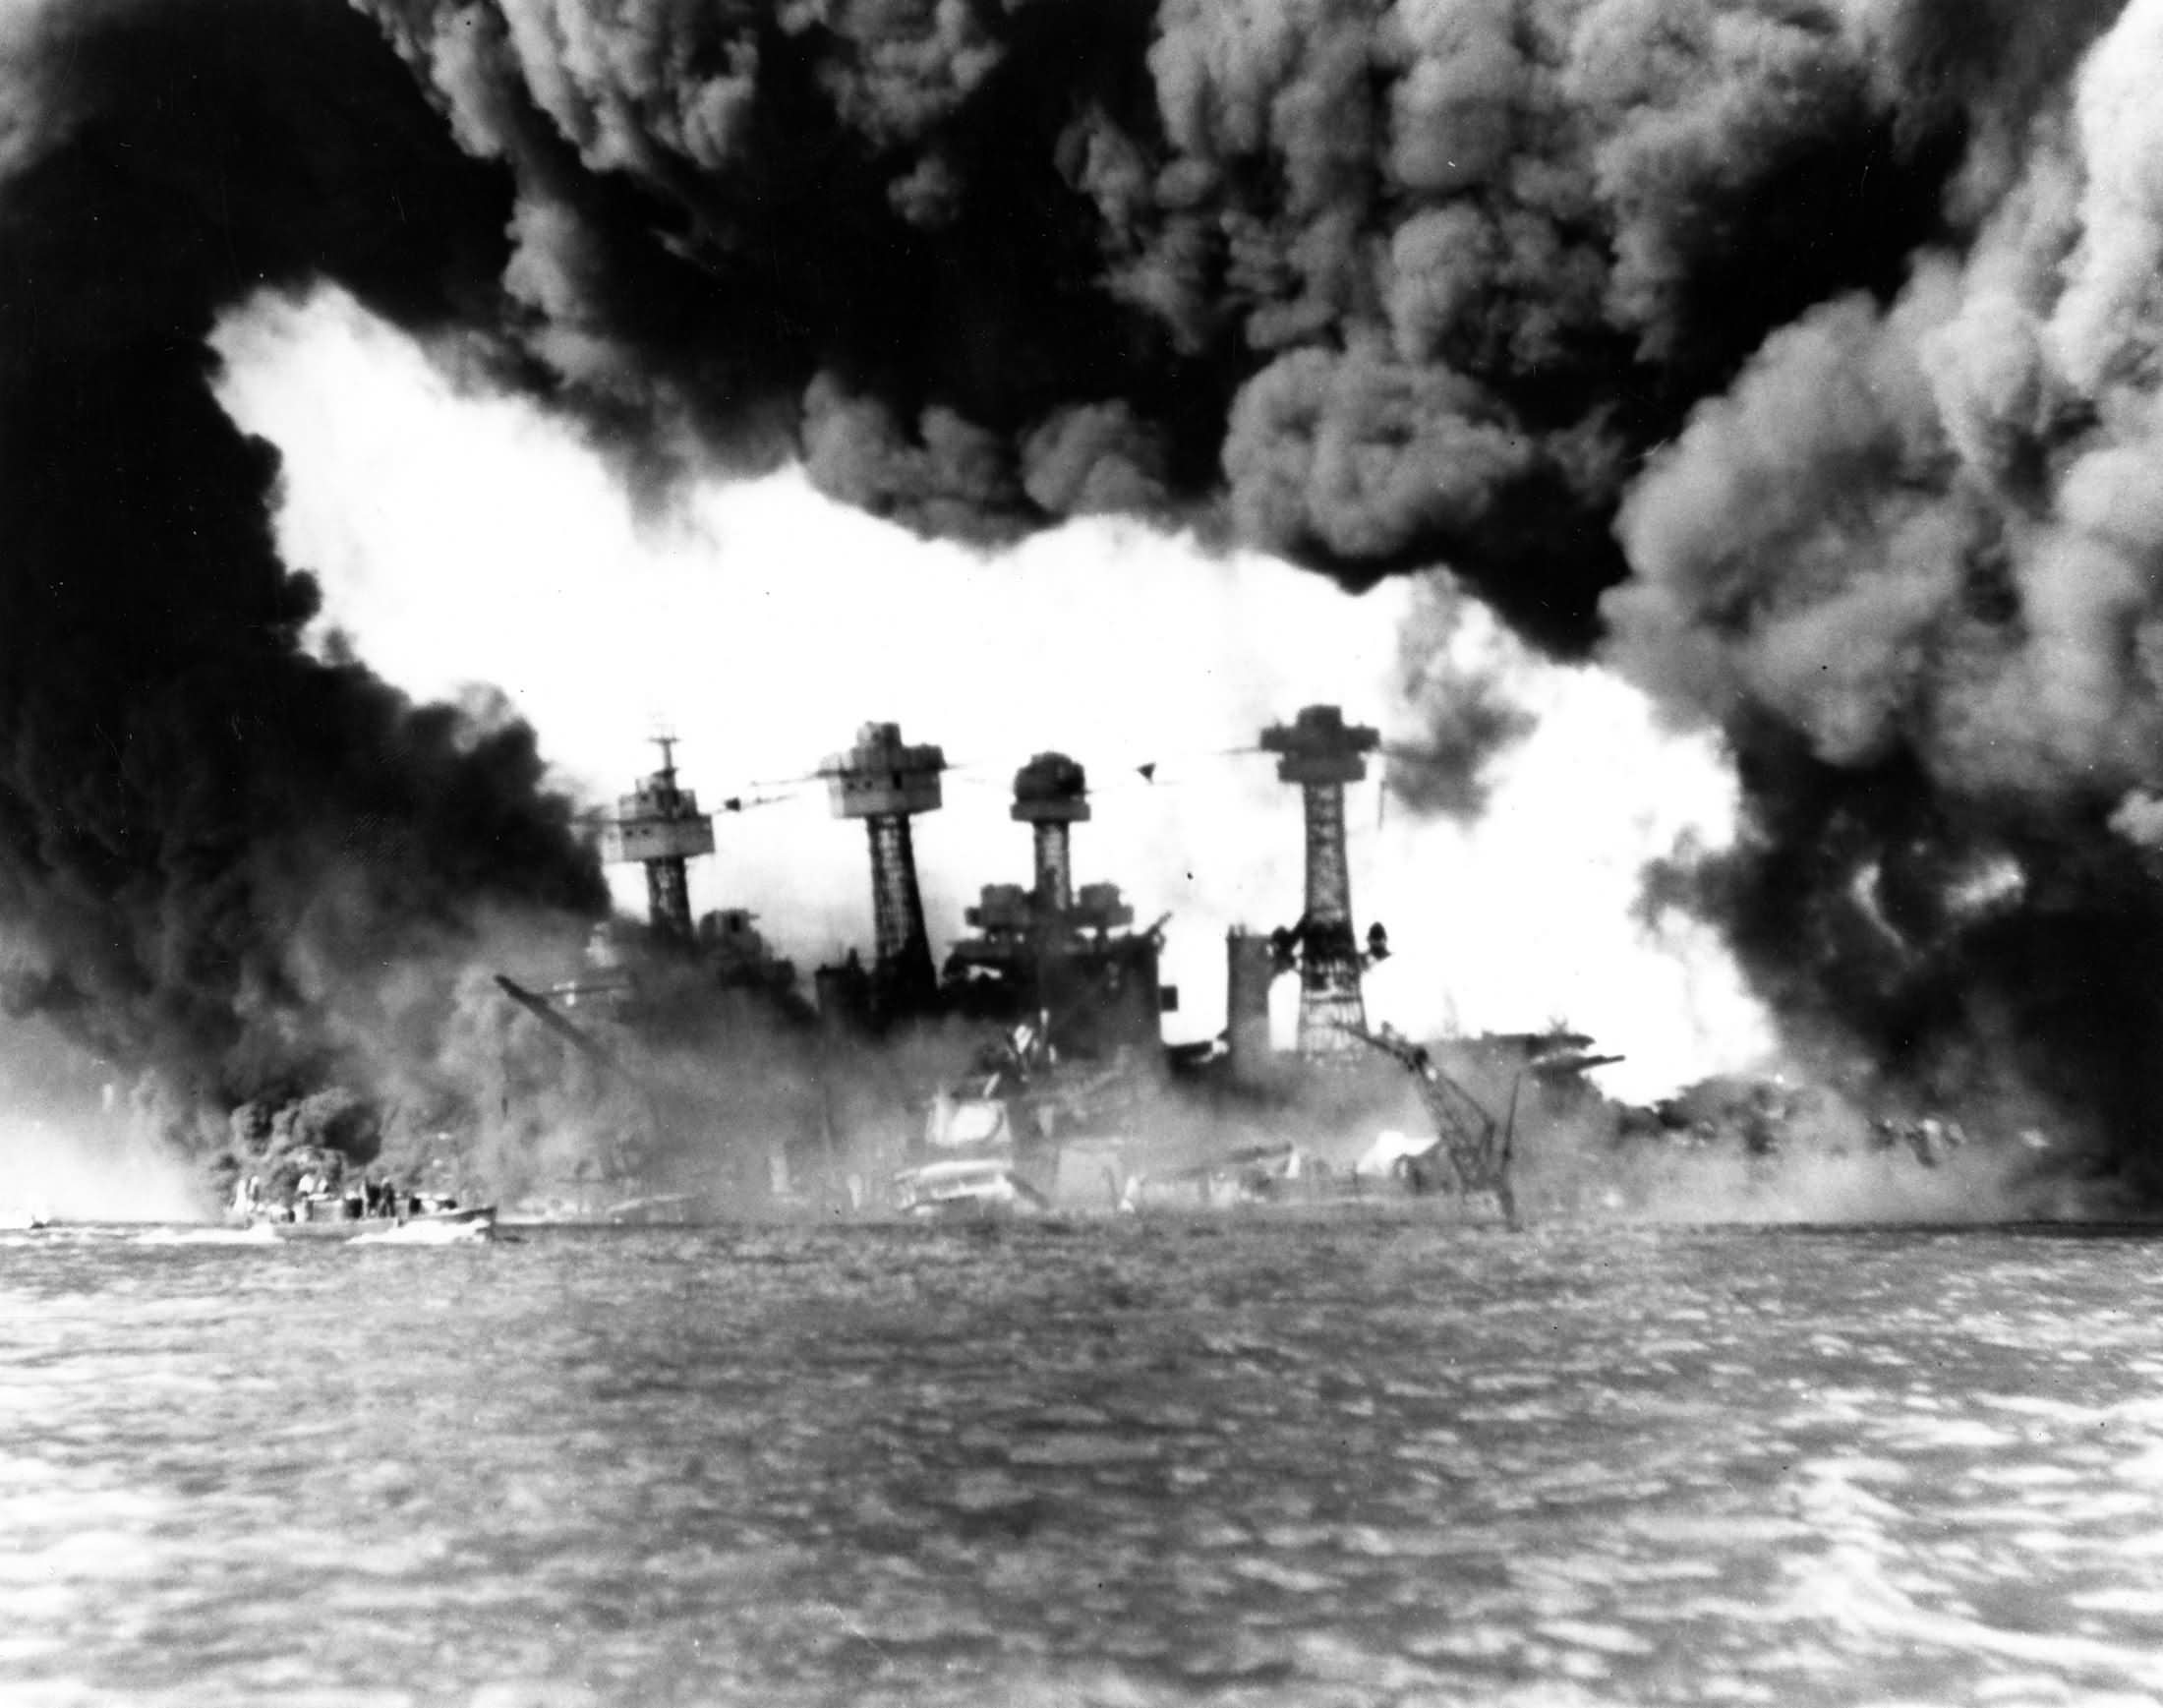 Battleships USS West Virginia and Tennessee – Pearl Harbor on 7 December 1941